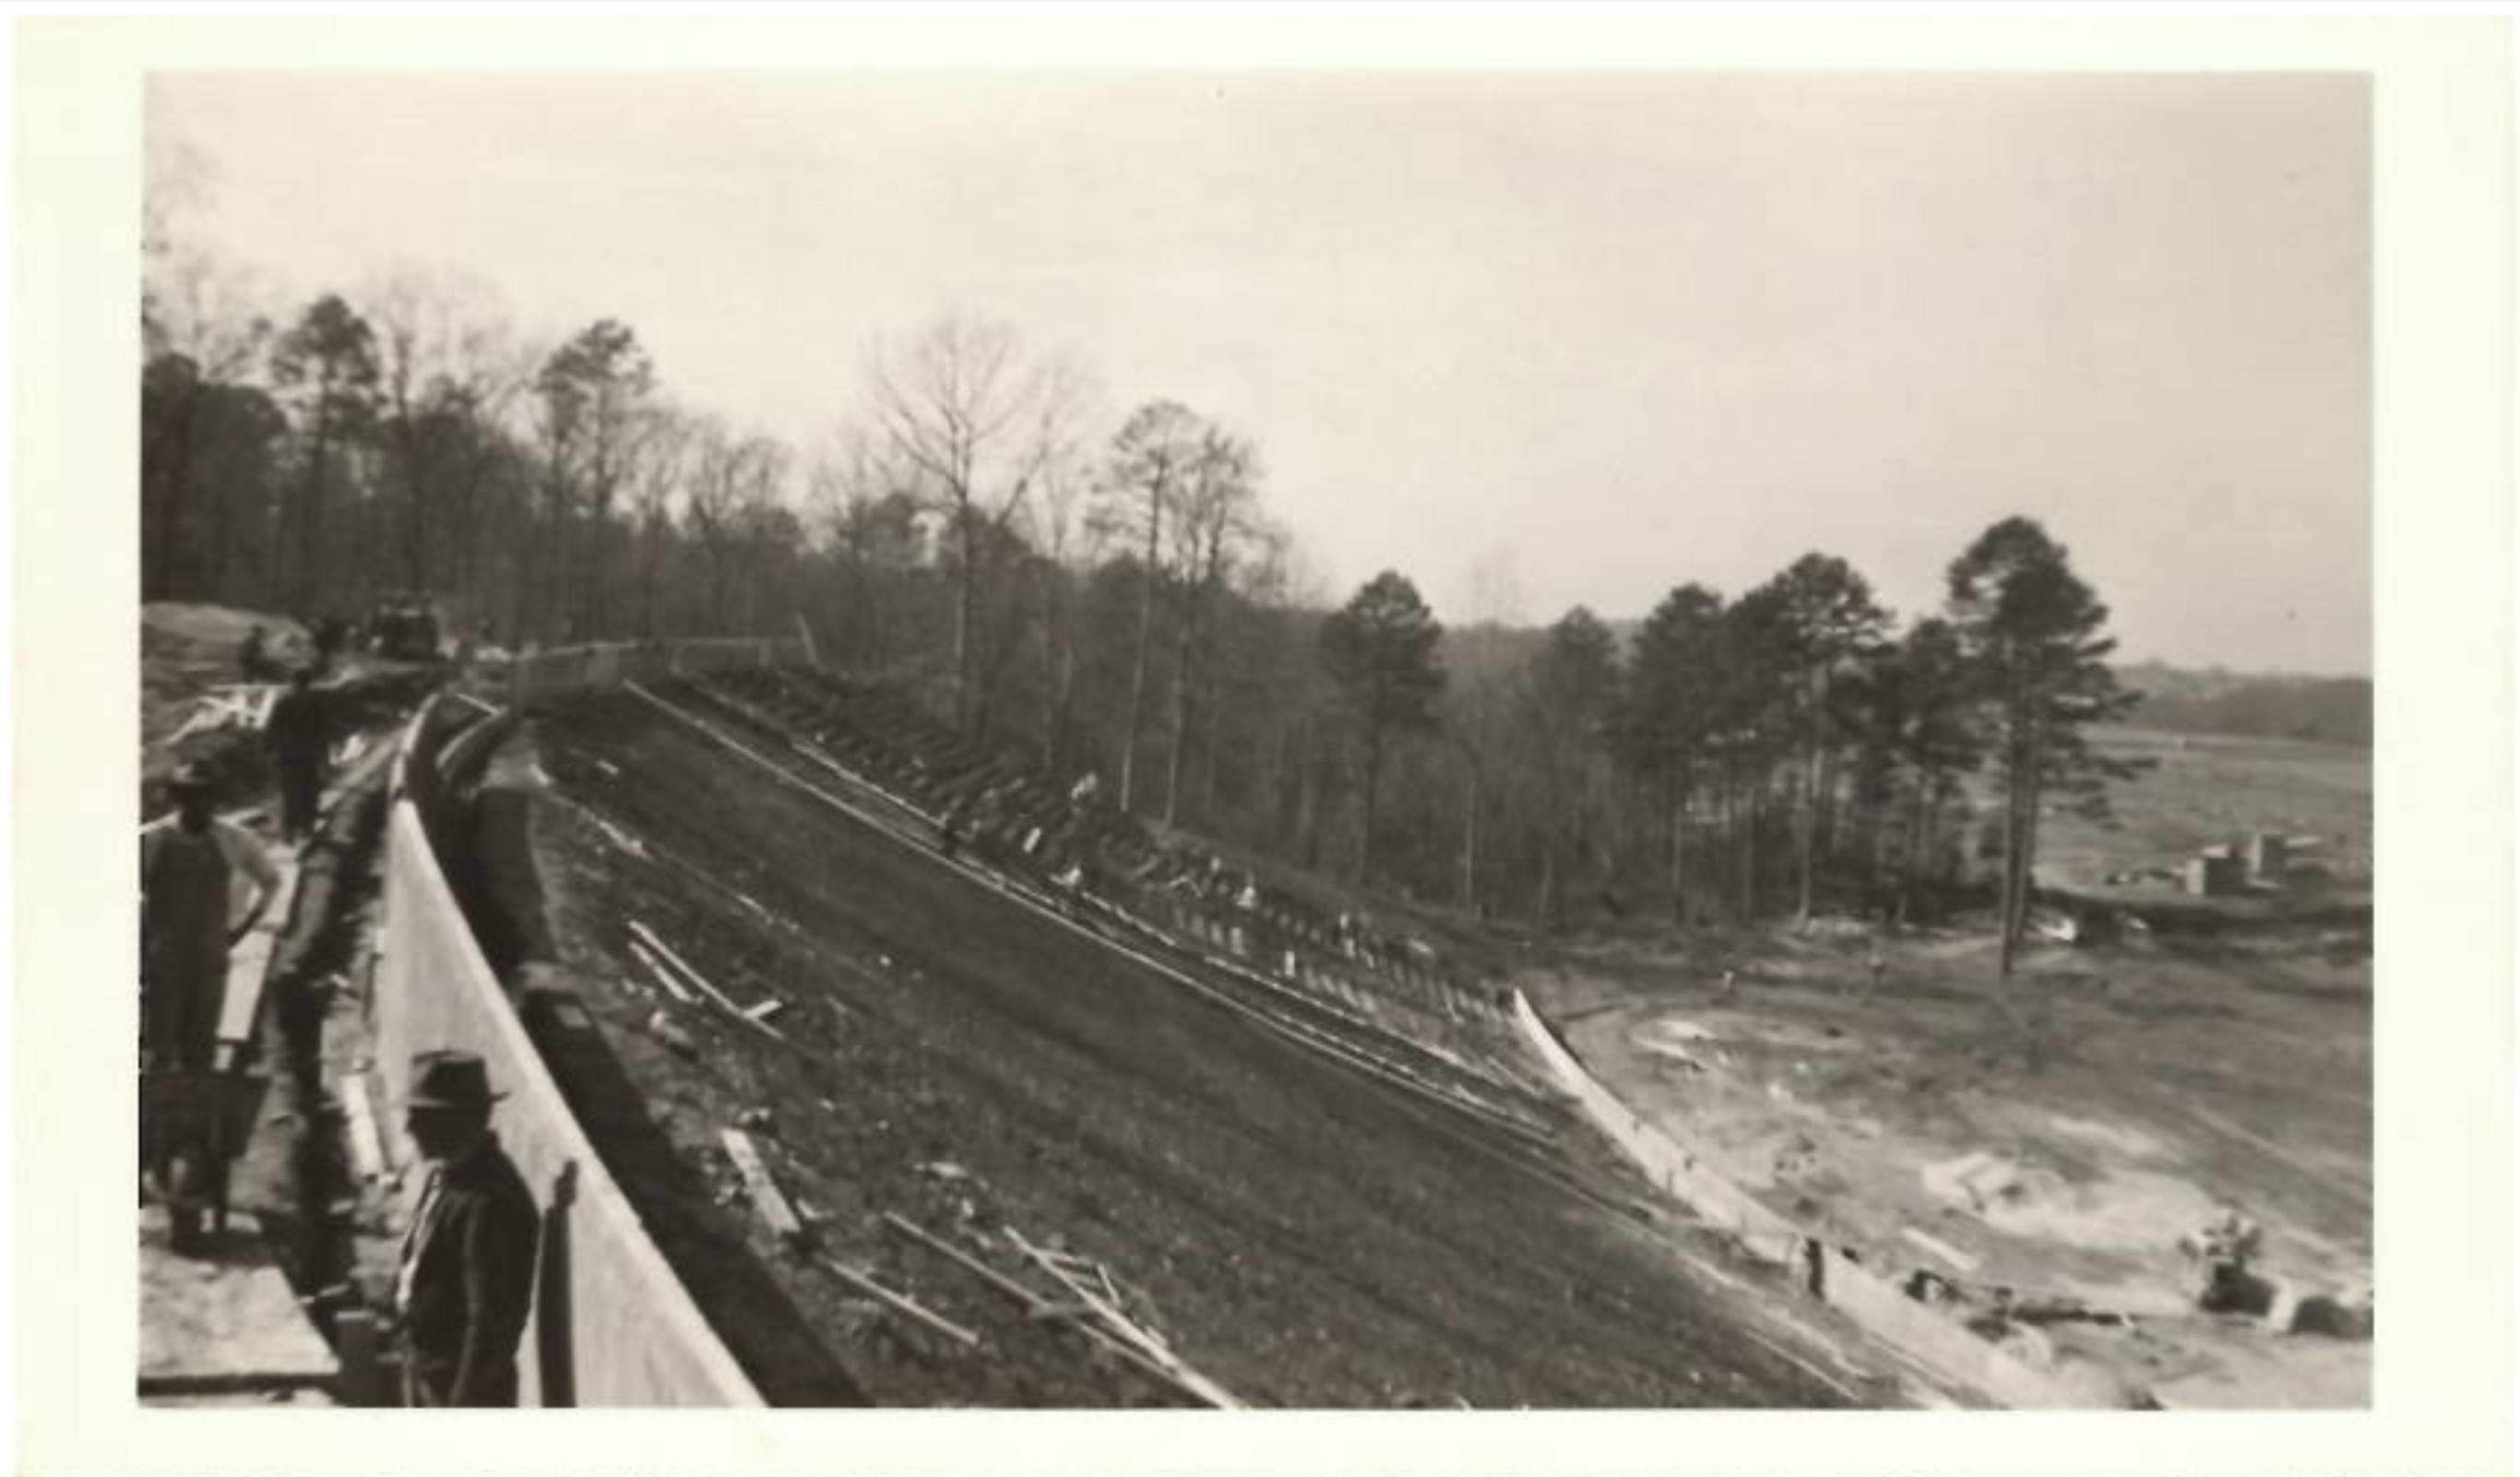 Building Memorial Stadium near Cemetery Hill in the early 1940s.